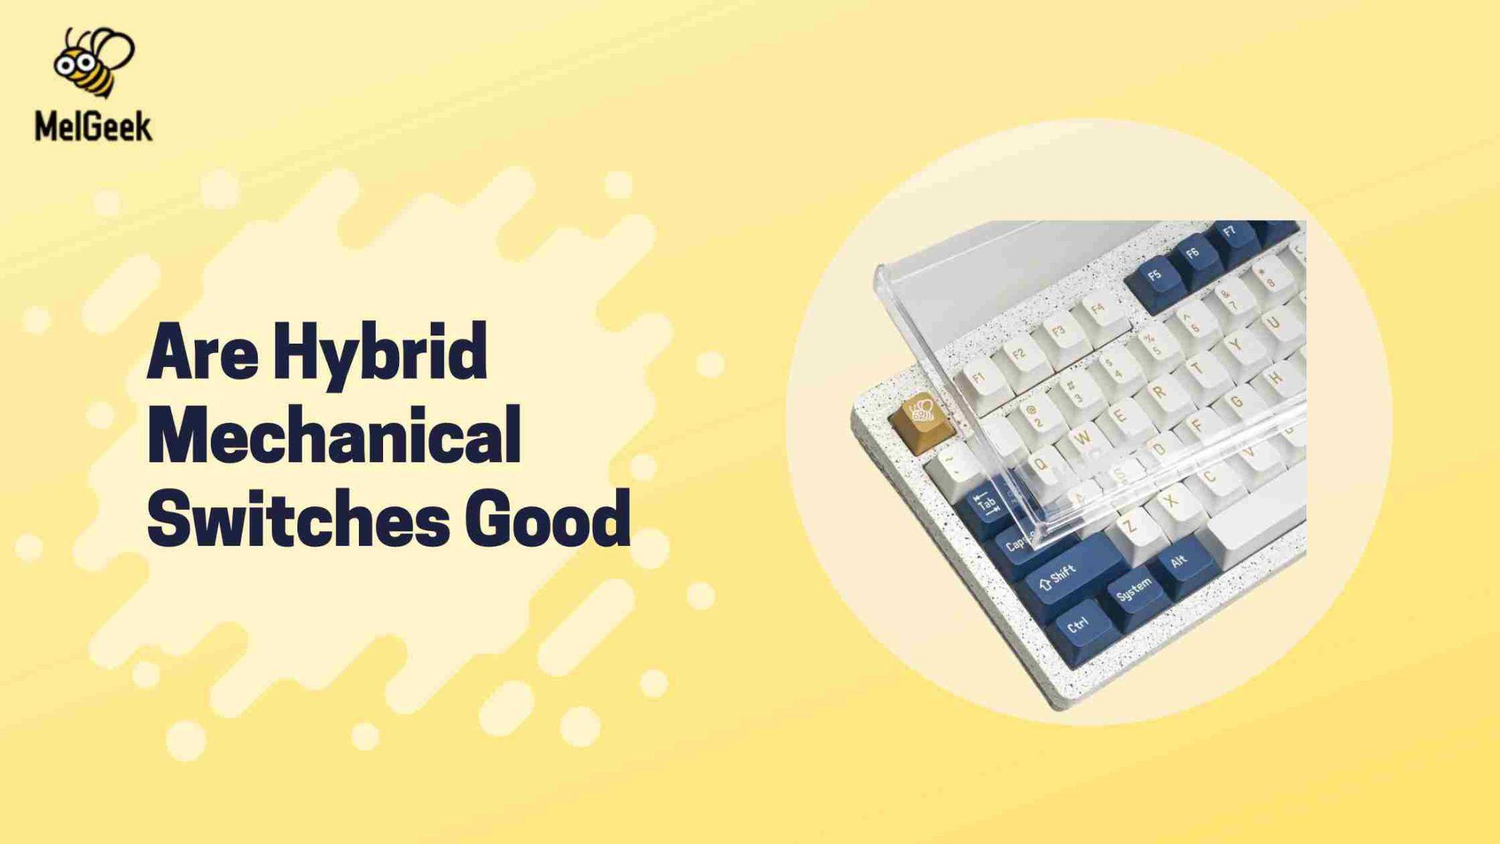 Are hybrid mechanical switches good?